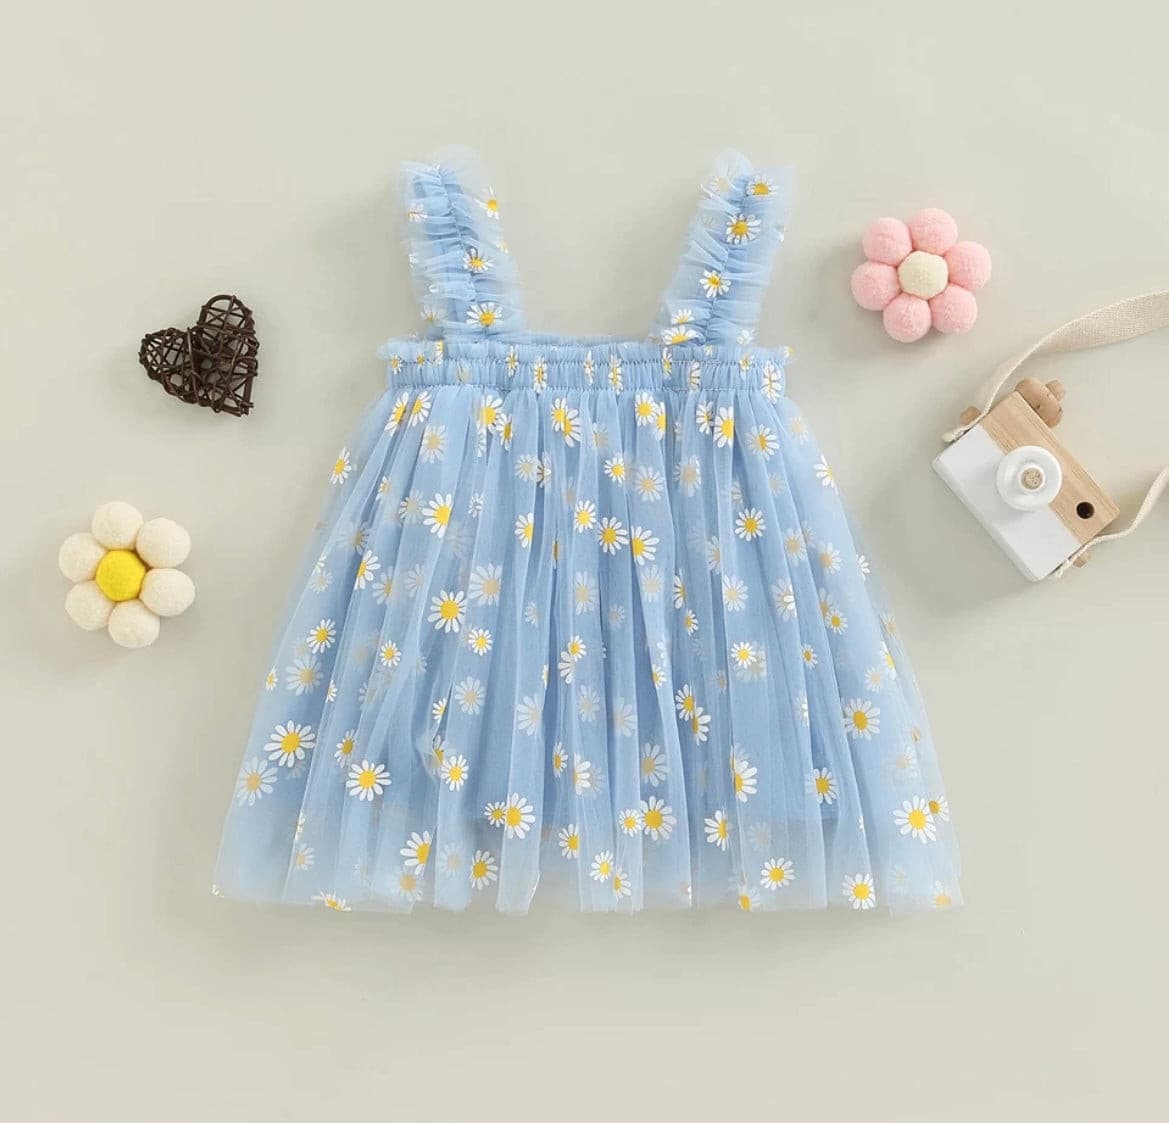 Girls Tulle Tutu Dress with Daisies - Sky Blue.